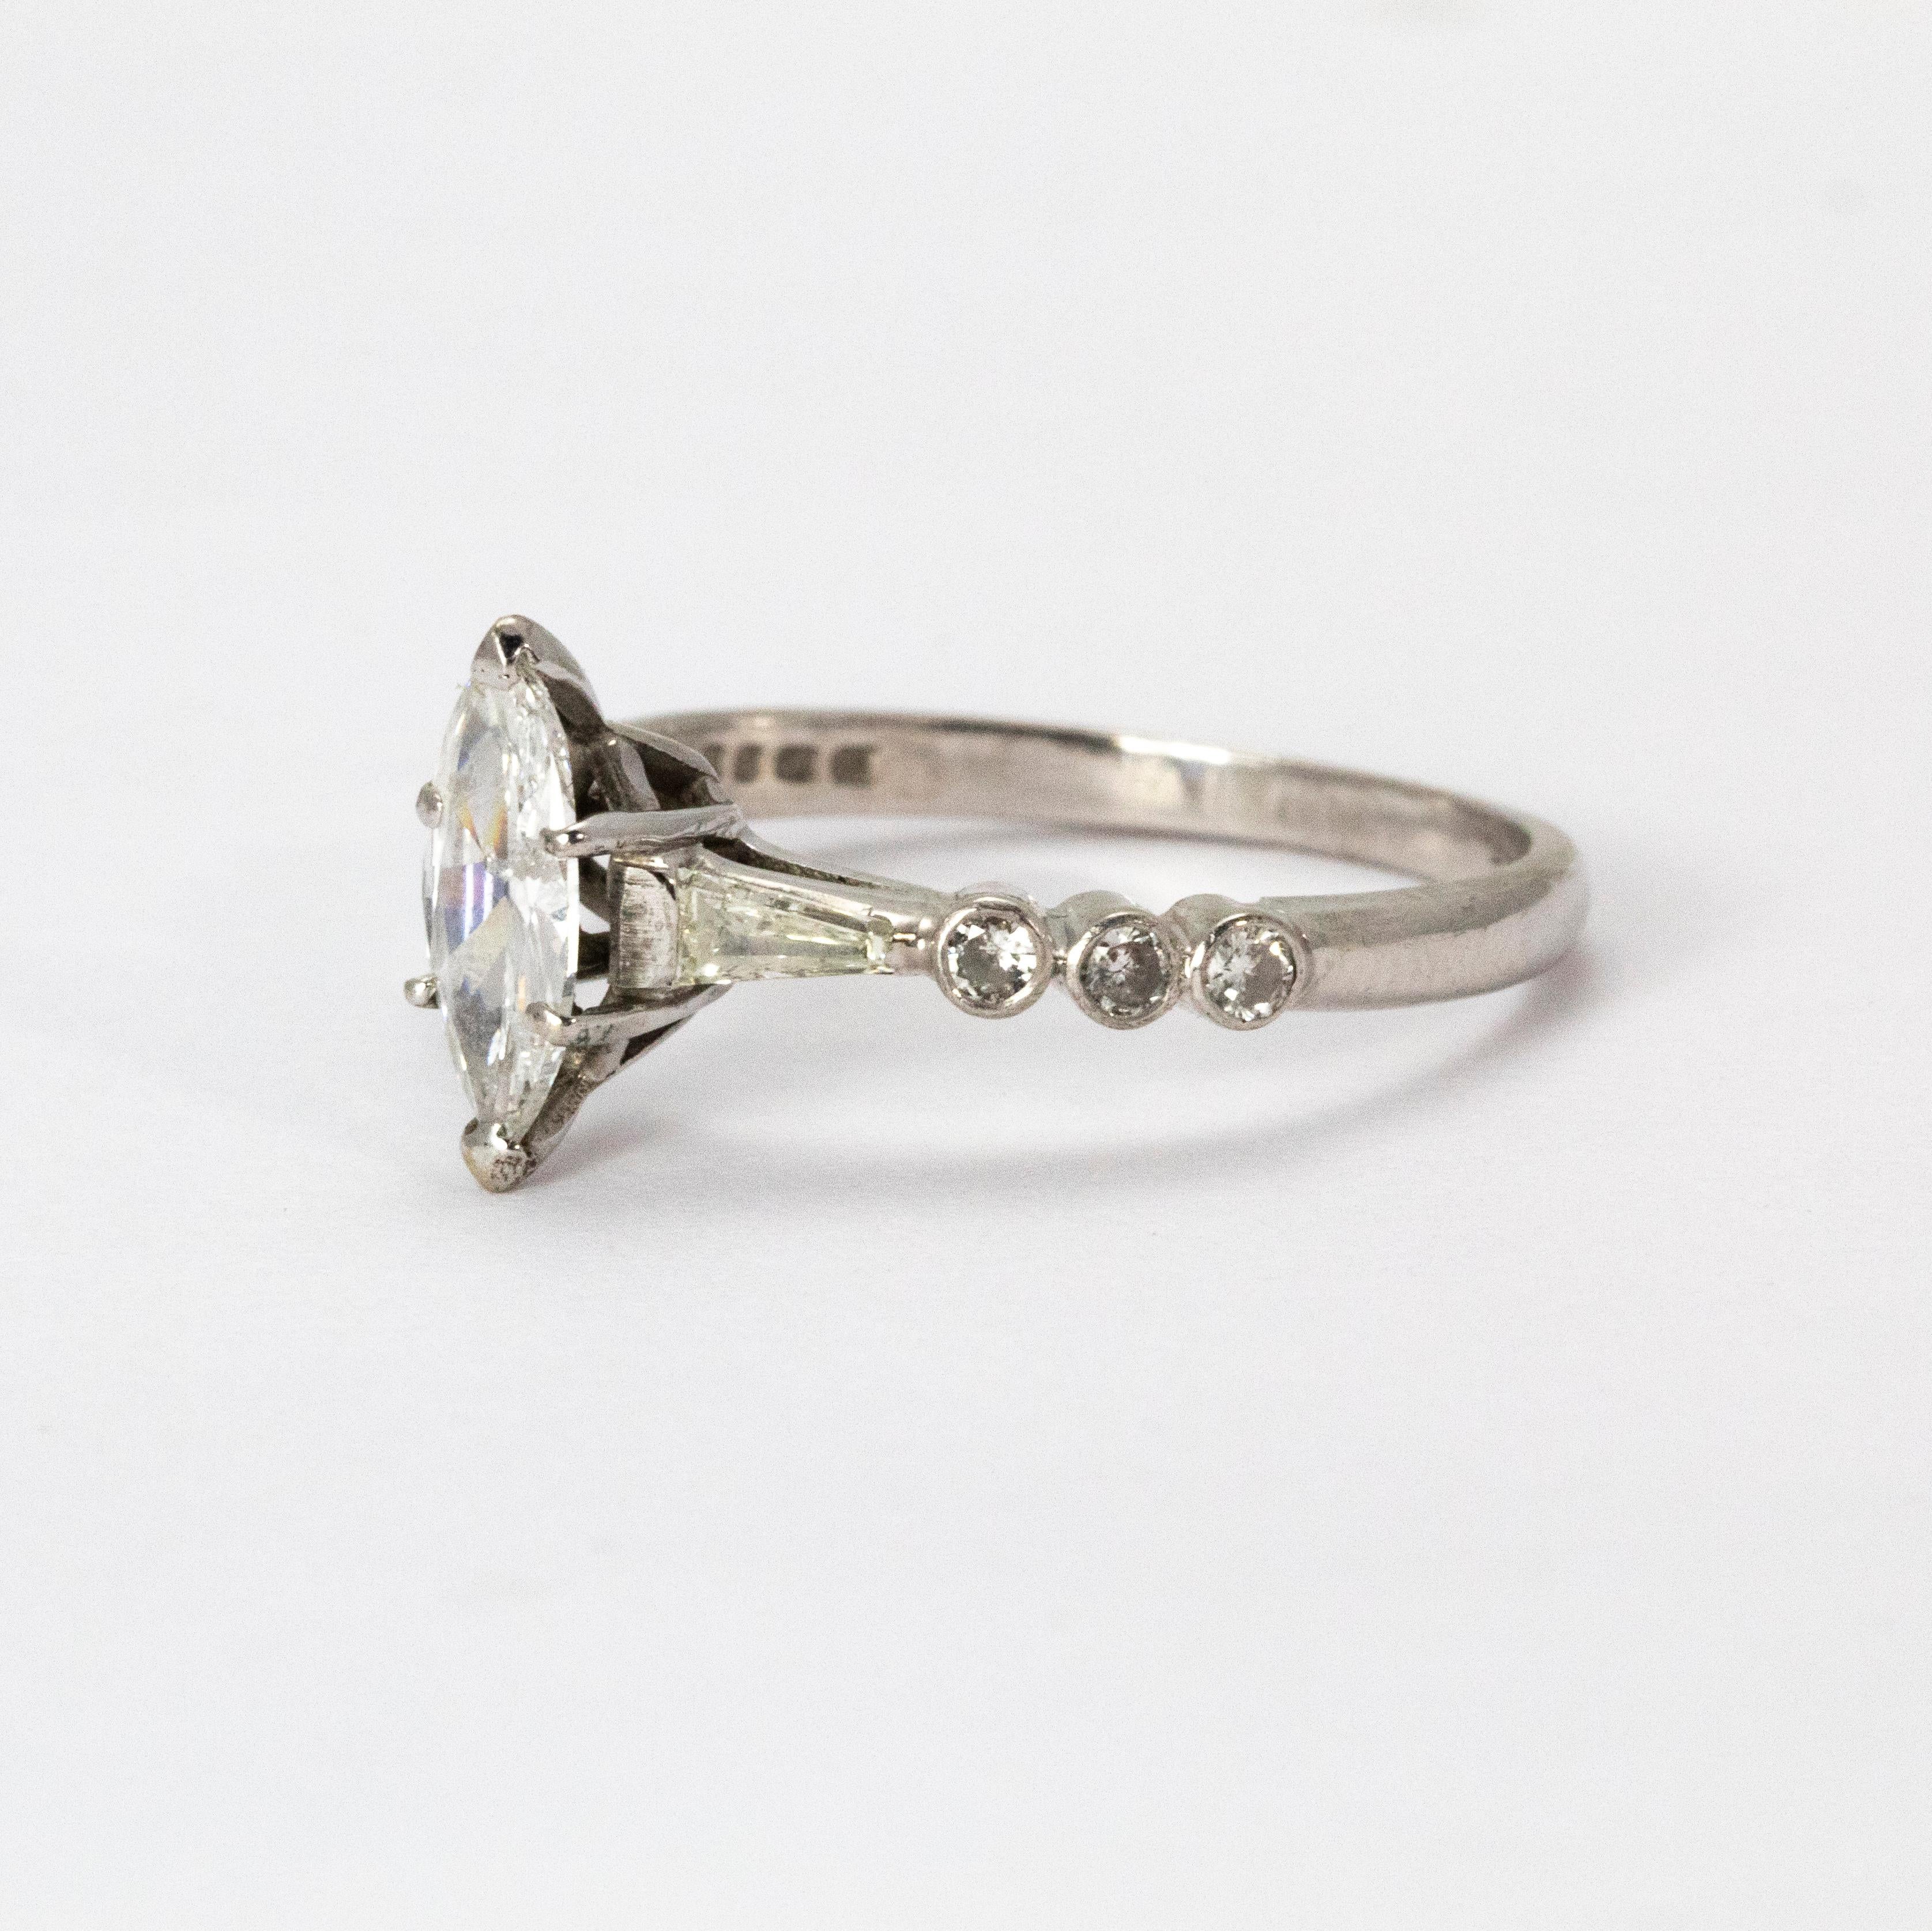 This stunning diamond marquise ring was crafted circa 1940. The brilliant central marquise cut diamond weighs 1.05 carats and is elegantly flanked by tapering baguette diamonds. Modelled in 18 karat white gold.

Ring Size: T or 9.5